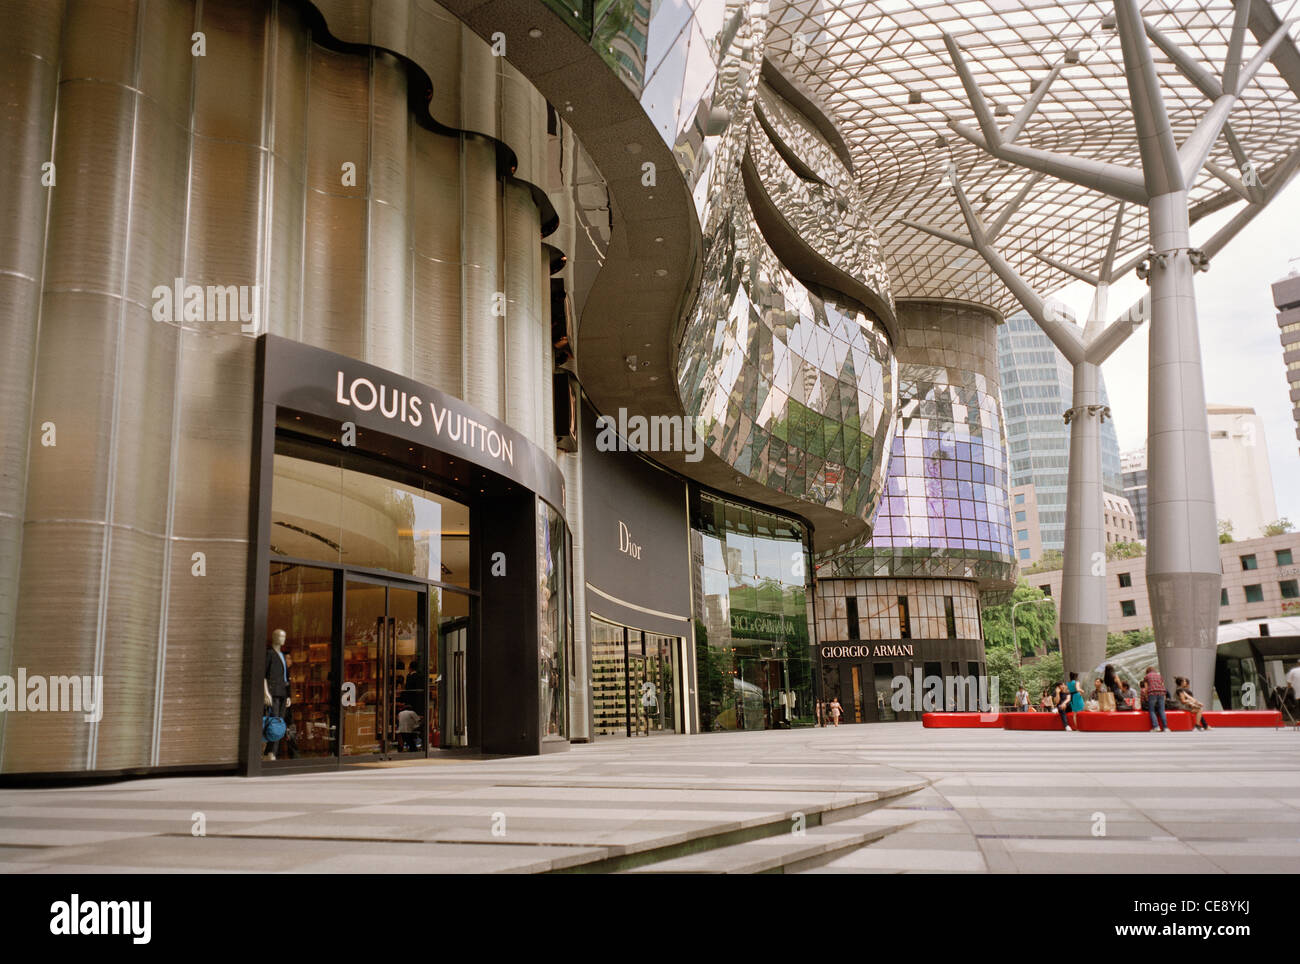 Singapore's Orchard Road Offers Glitzy Shopping and a Posh Lifestyle -  Mansion Global